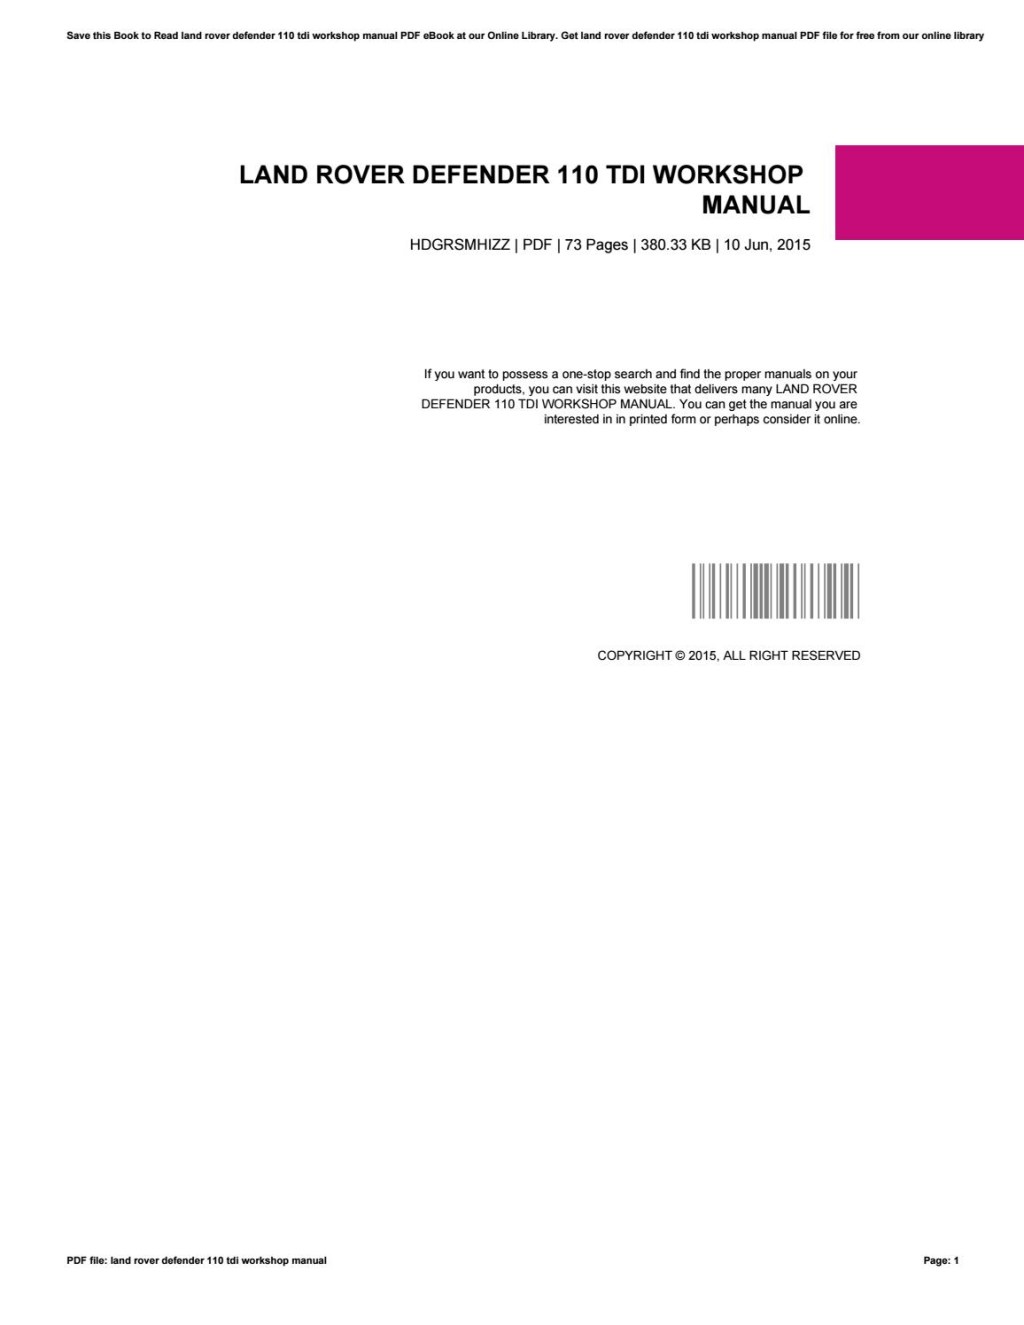 Picture of: Land rover defender  tdi workshop manual by DaveCasper – Issuu